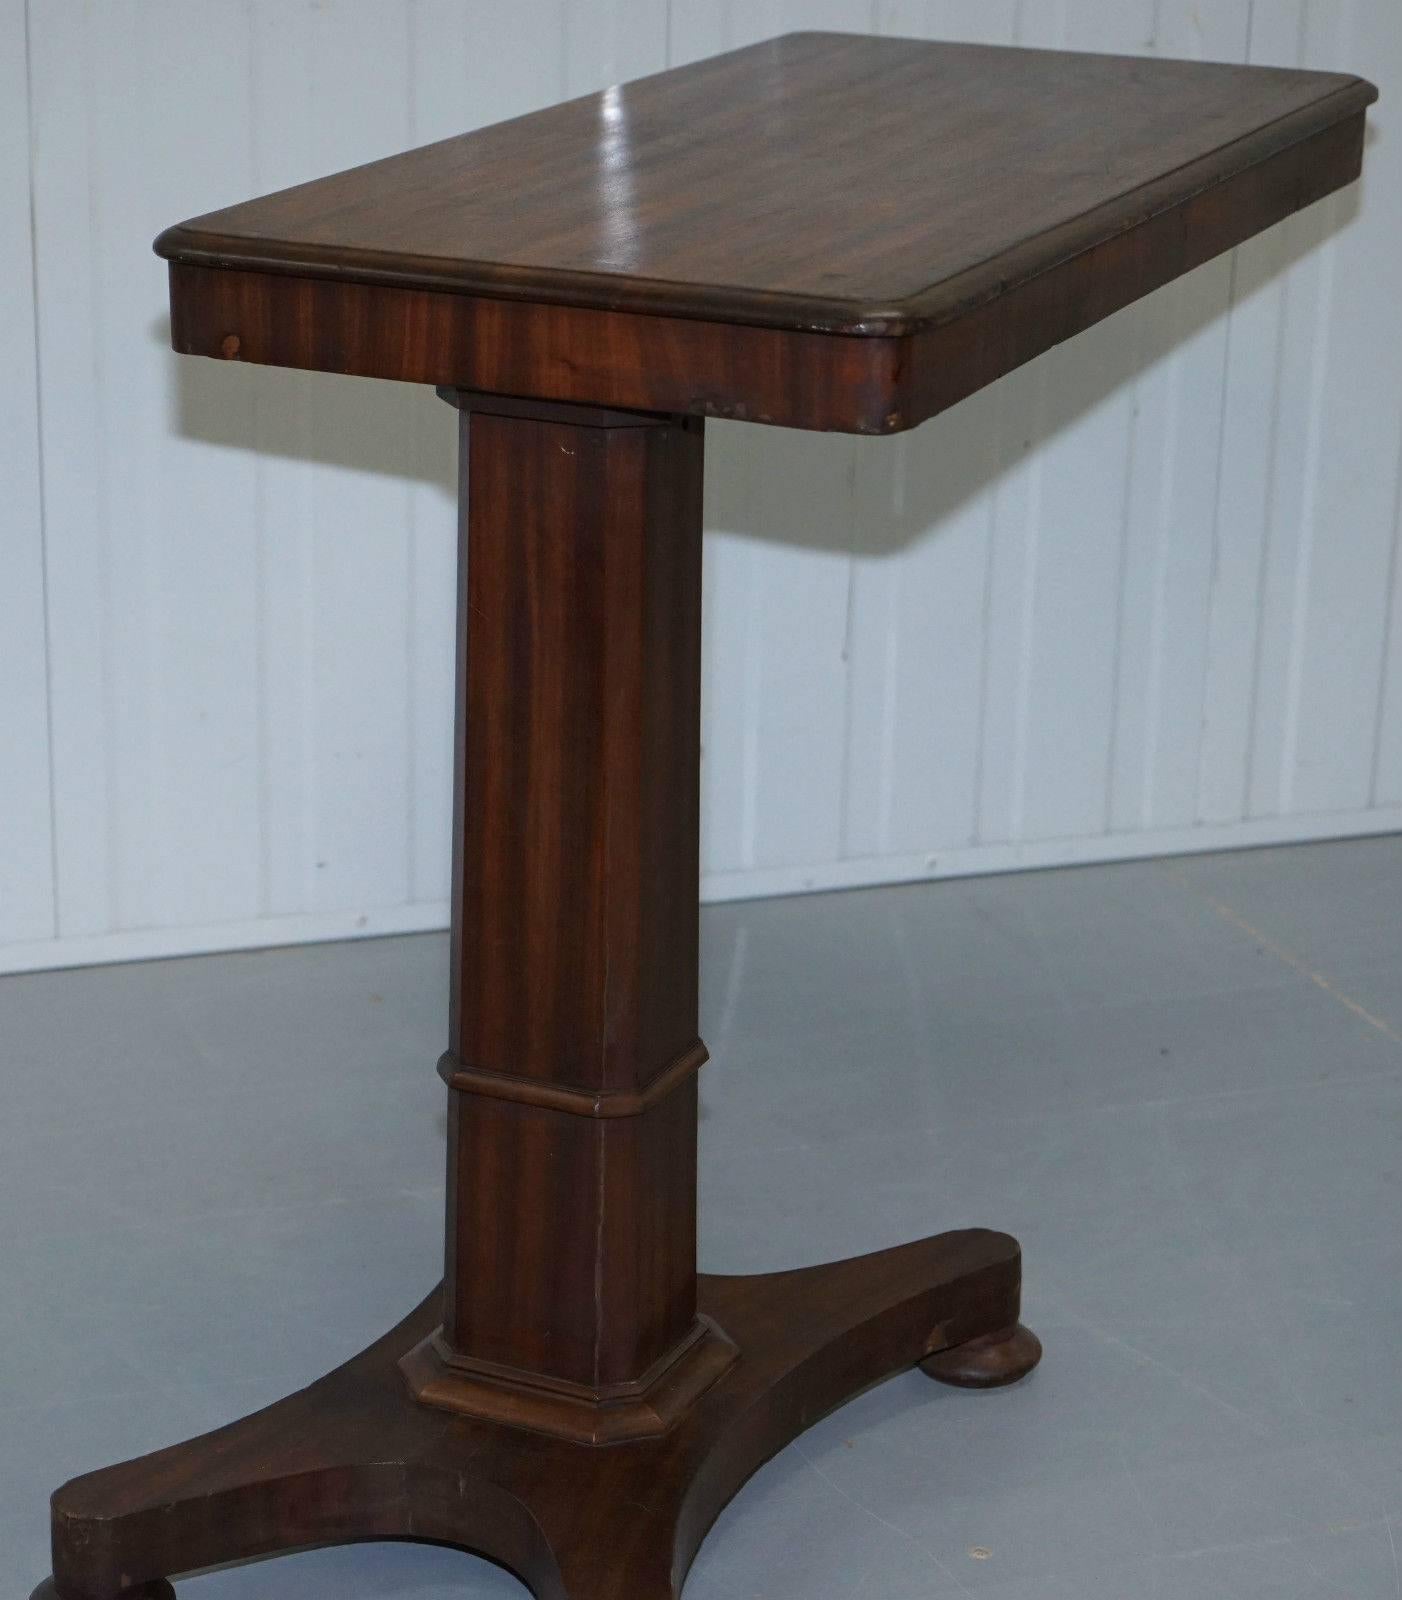 Hand-Crafted Rare Victorian Reading Table Height and Tilt Adjustable Stands over Bed Console